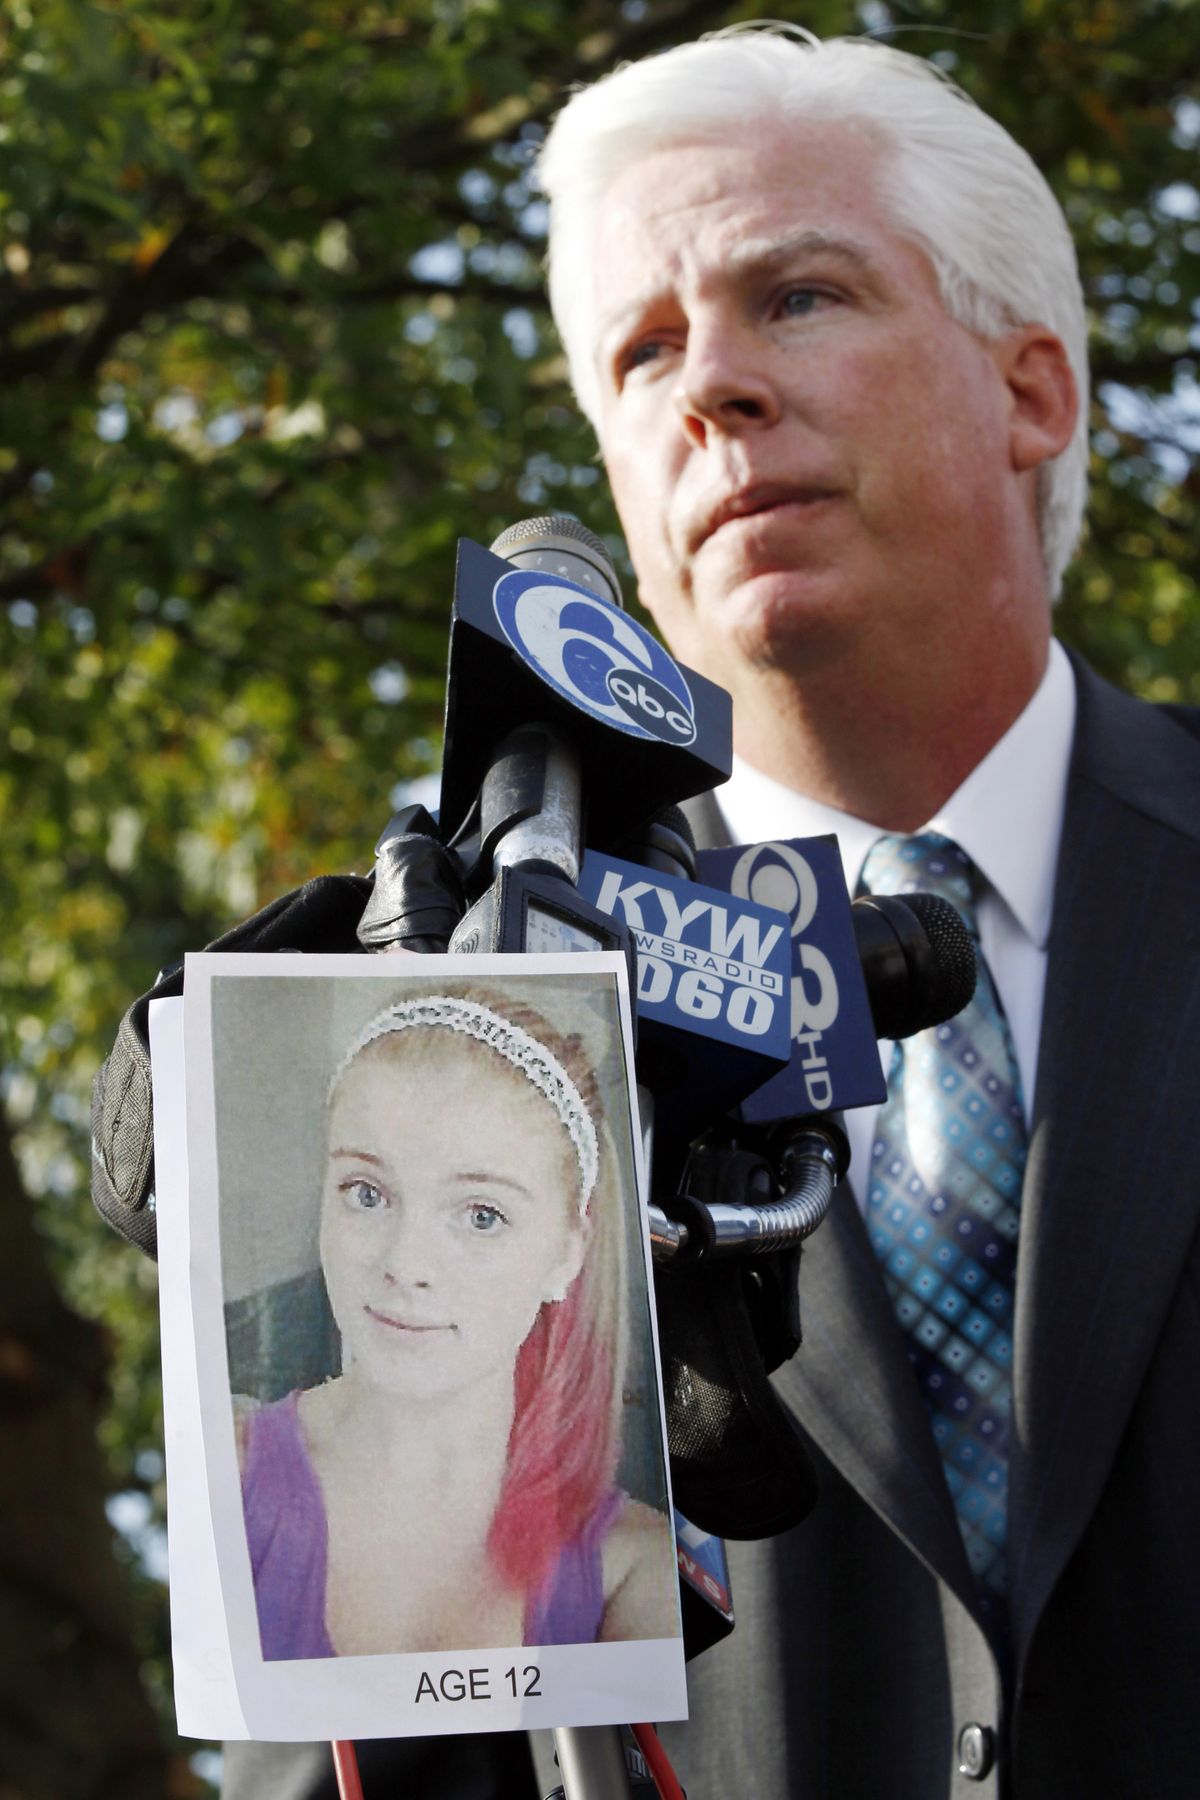 A photograph of Autumn Pasquale is seen as Gloucester County Prosecutor Sean Dalton addresses a gathering outside town hall Tuesday, Oct. 23, 2012, in Clayton, N.J., not far from where a body preliminarily identified as the missing 12-year-old girl